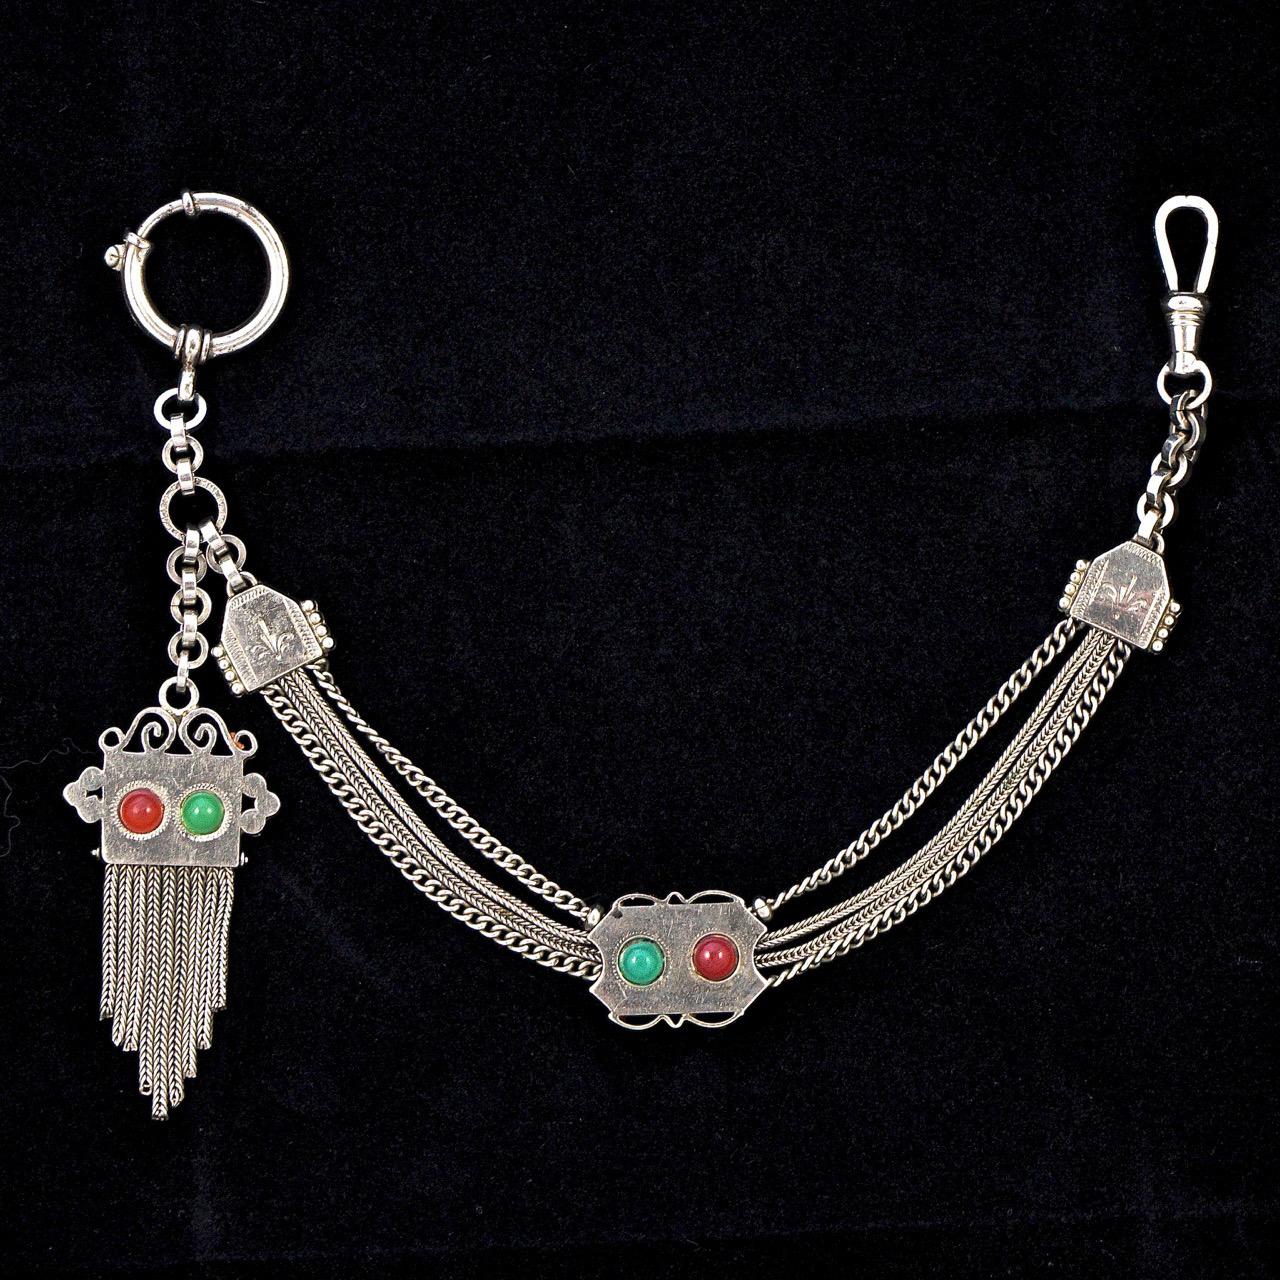 German Oberstein antique silver tone detailed pocket watch chain, featuring red and green stones. Measuring length 27cm / 10.6 inches. The watch chain is in very good condition, with scratching as expected.

This is a stylish and ornate pocket watch